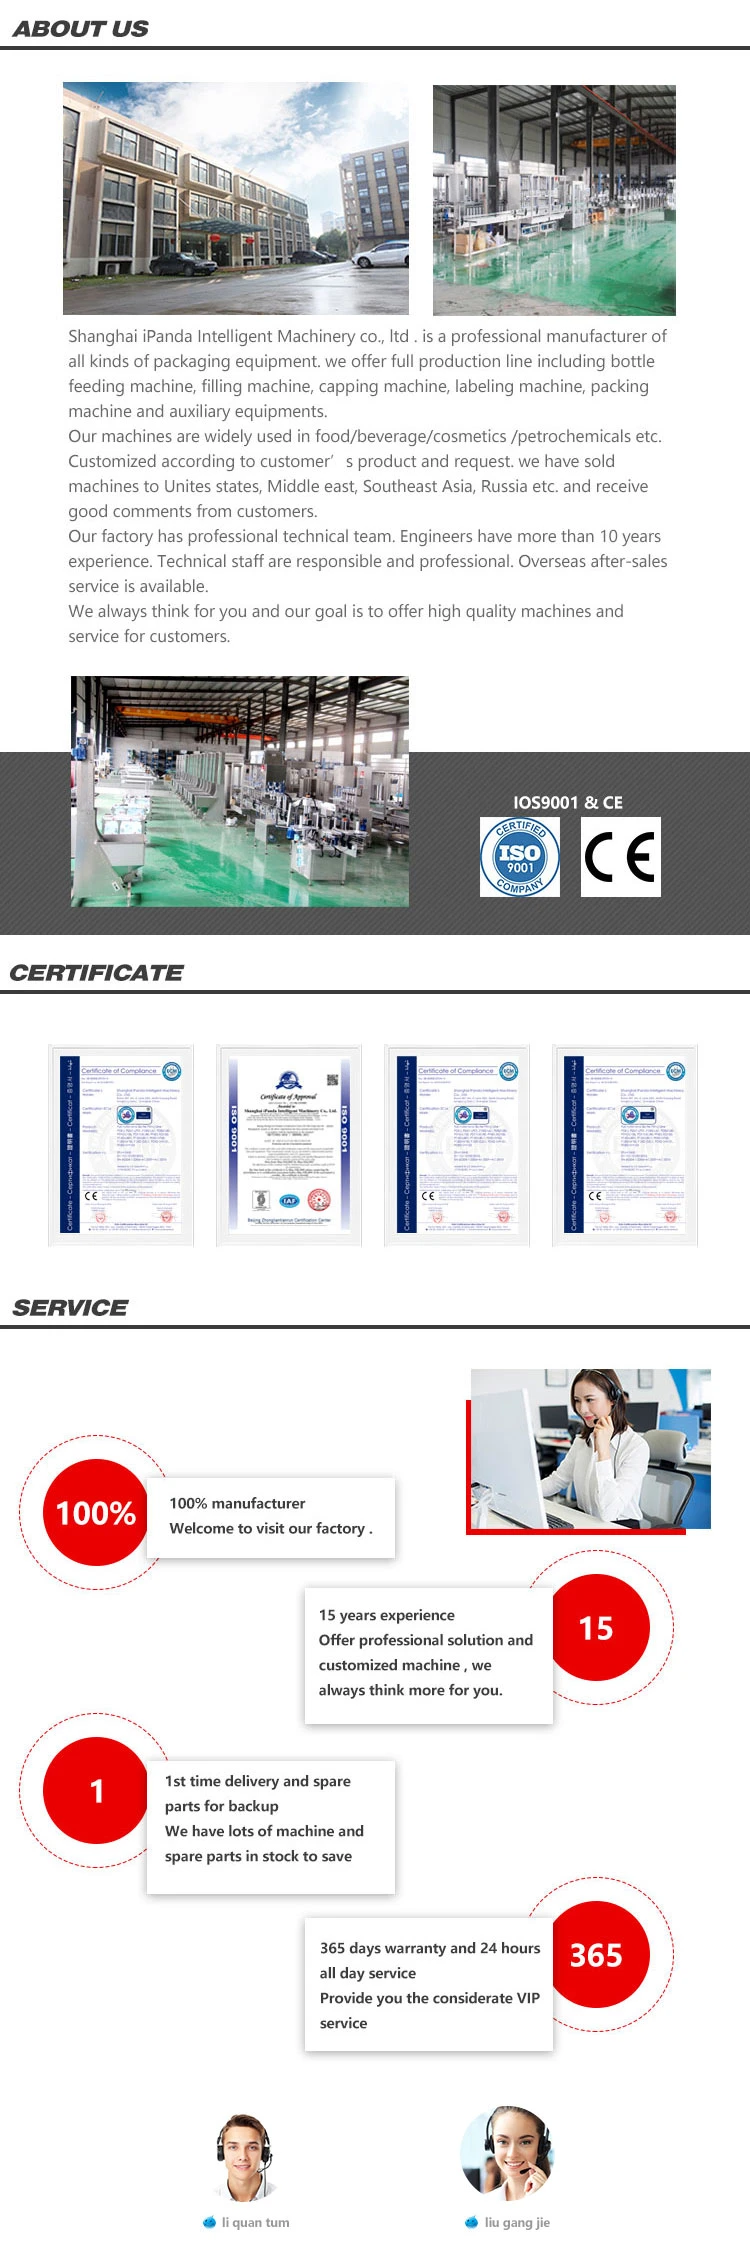 Automatic Peristaltic Pump Rotary Type Dropper Bottles Filling Capping Machine